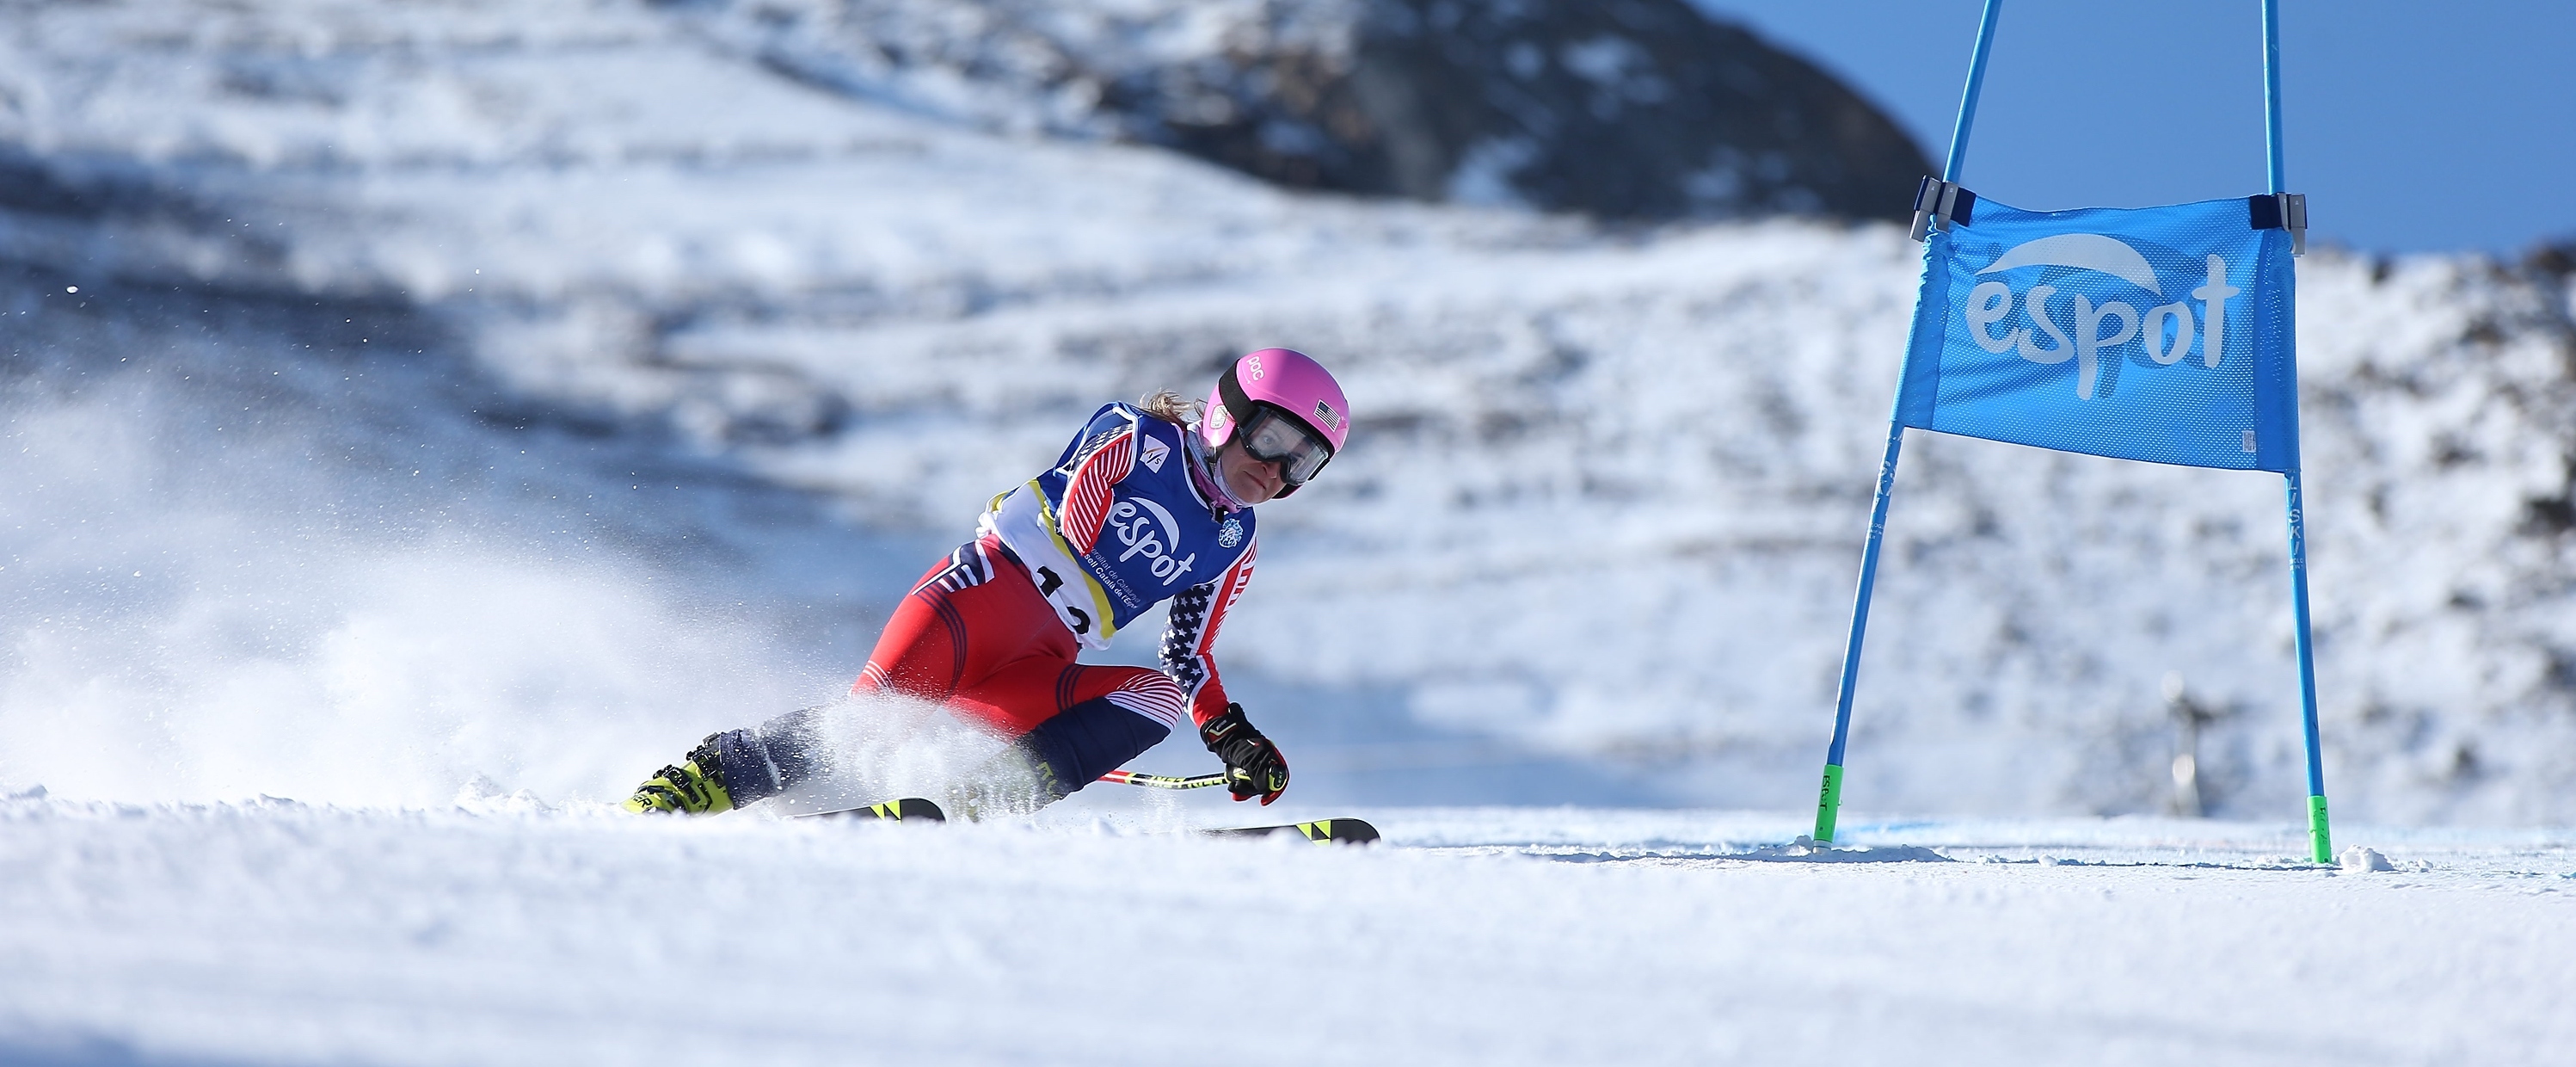 Allie Johnson competing in Womens Super-G at the 2023 FIS Para Alpine Ski World Championships, Espot, Spain. (Photo by Marcus Hartmann)